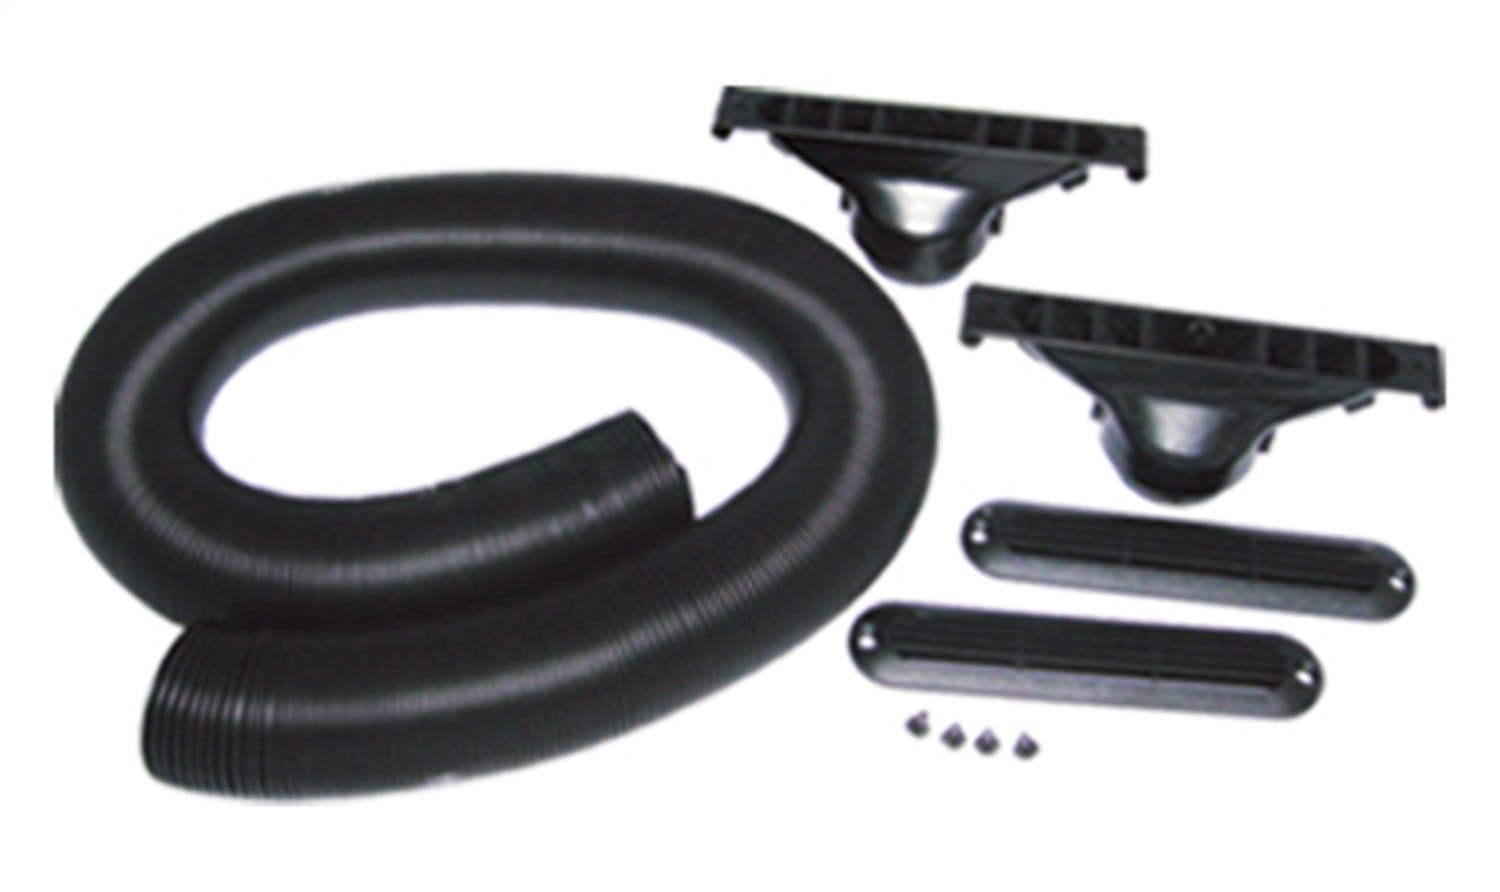 Maradyne MFA126 Defrost kit - (2) defrost chutes/grilles, 10 flexhose and tie wraps